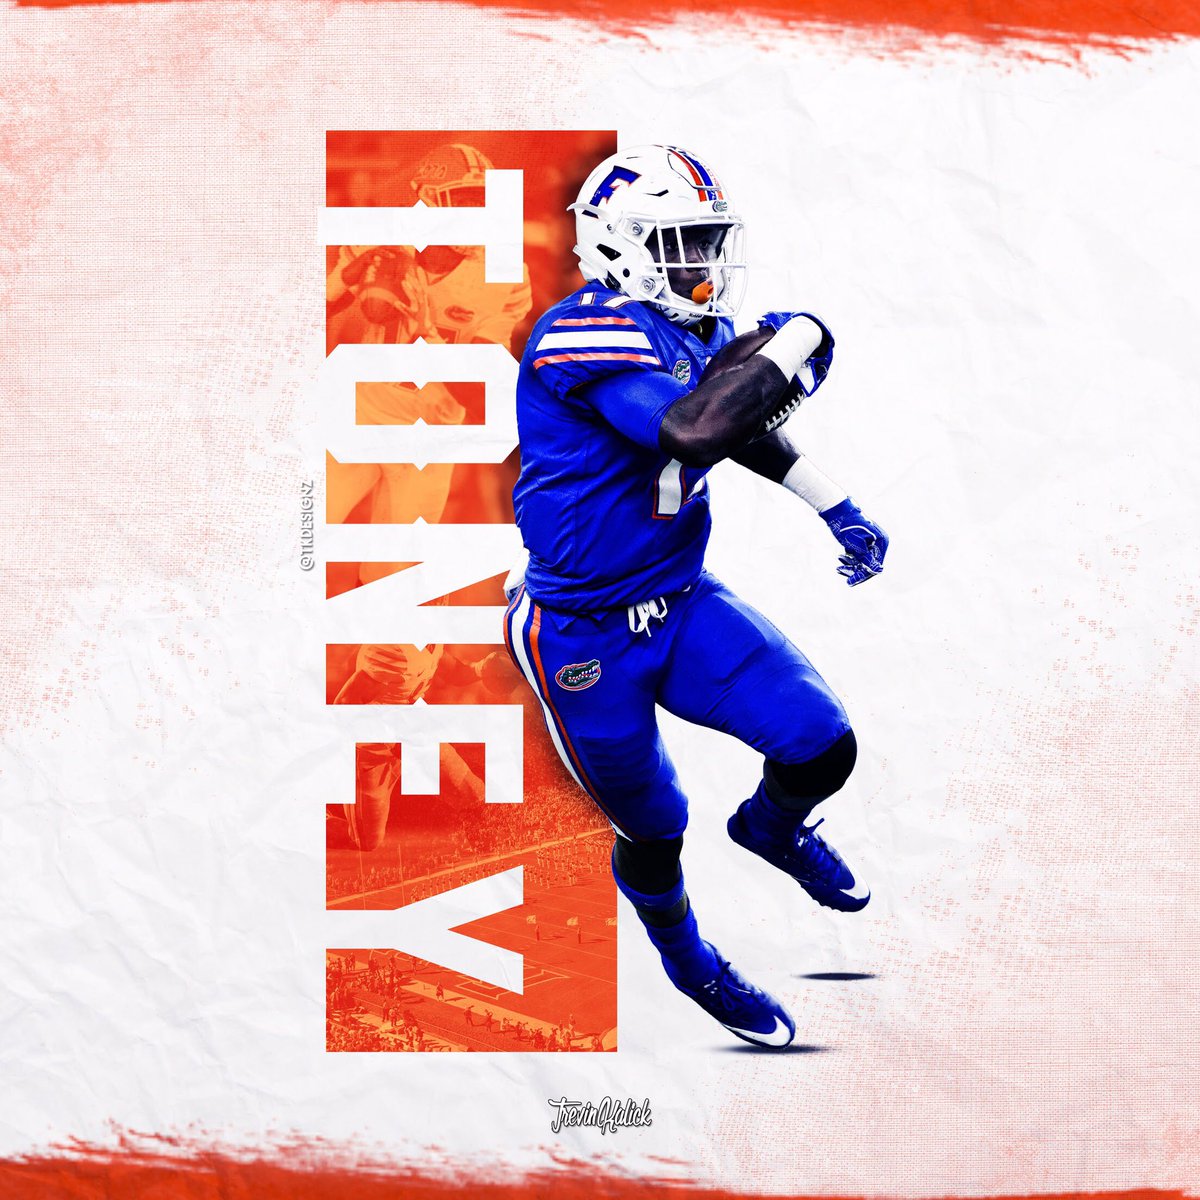 Trevin J Kalick  we see Kadarius Toney become a deadly weapon for the #Gators